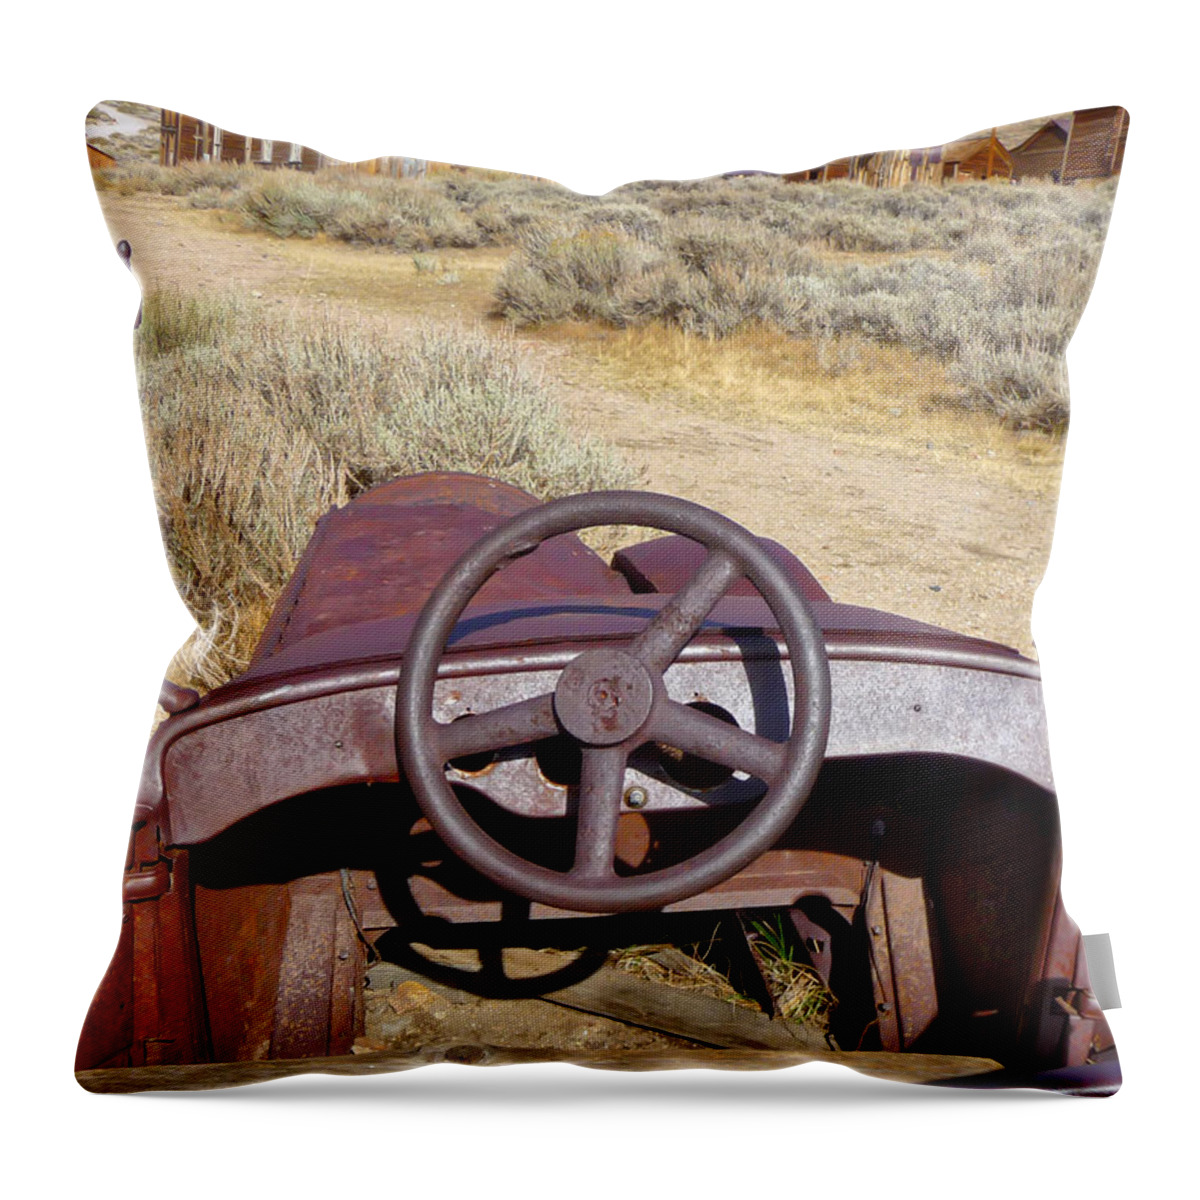 Bodie Throw Pillow featuring the photograph Nonverbal #43 by Steven Lapkin